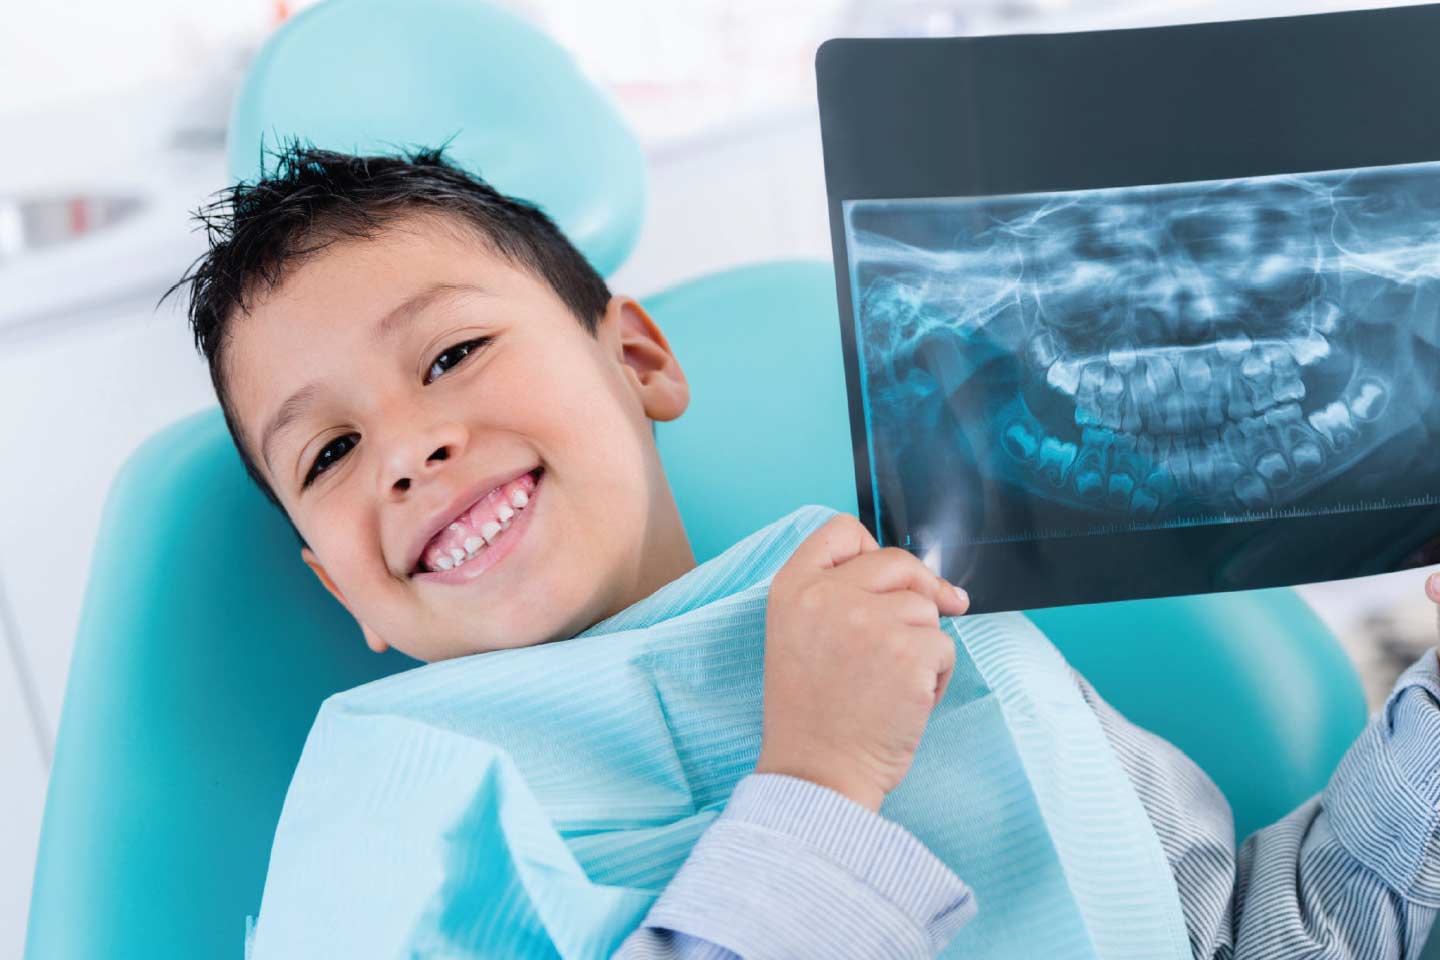 Kid smiling while holding up dental x-rays